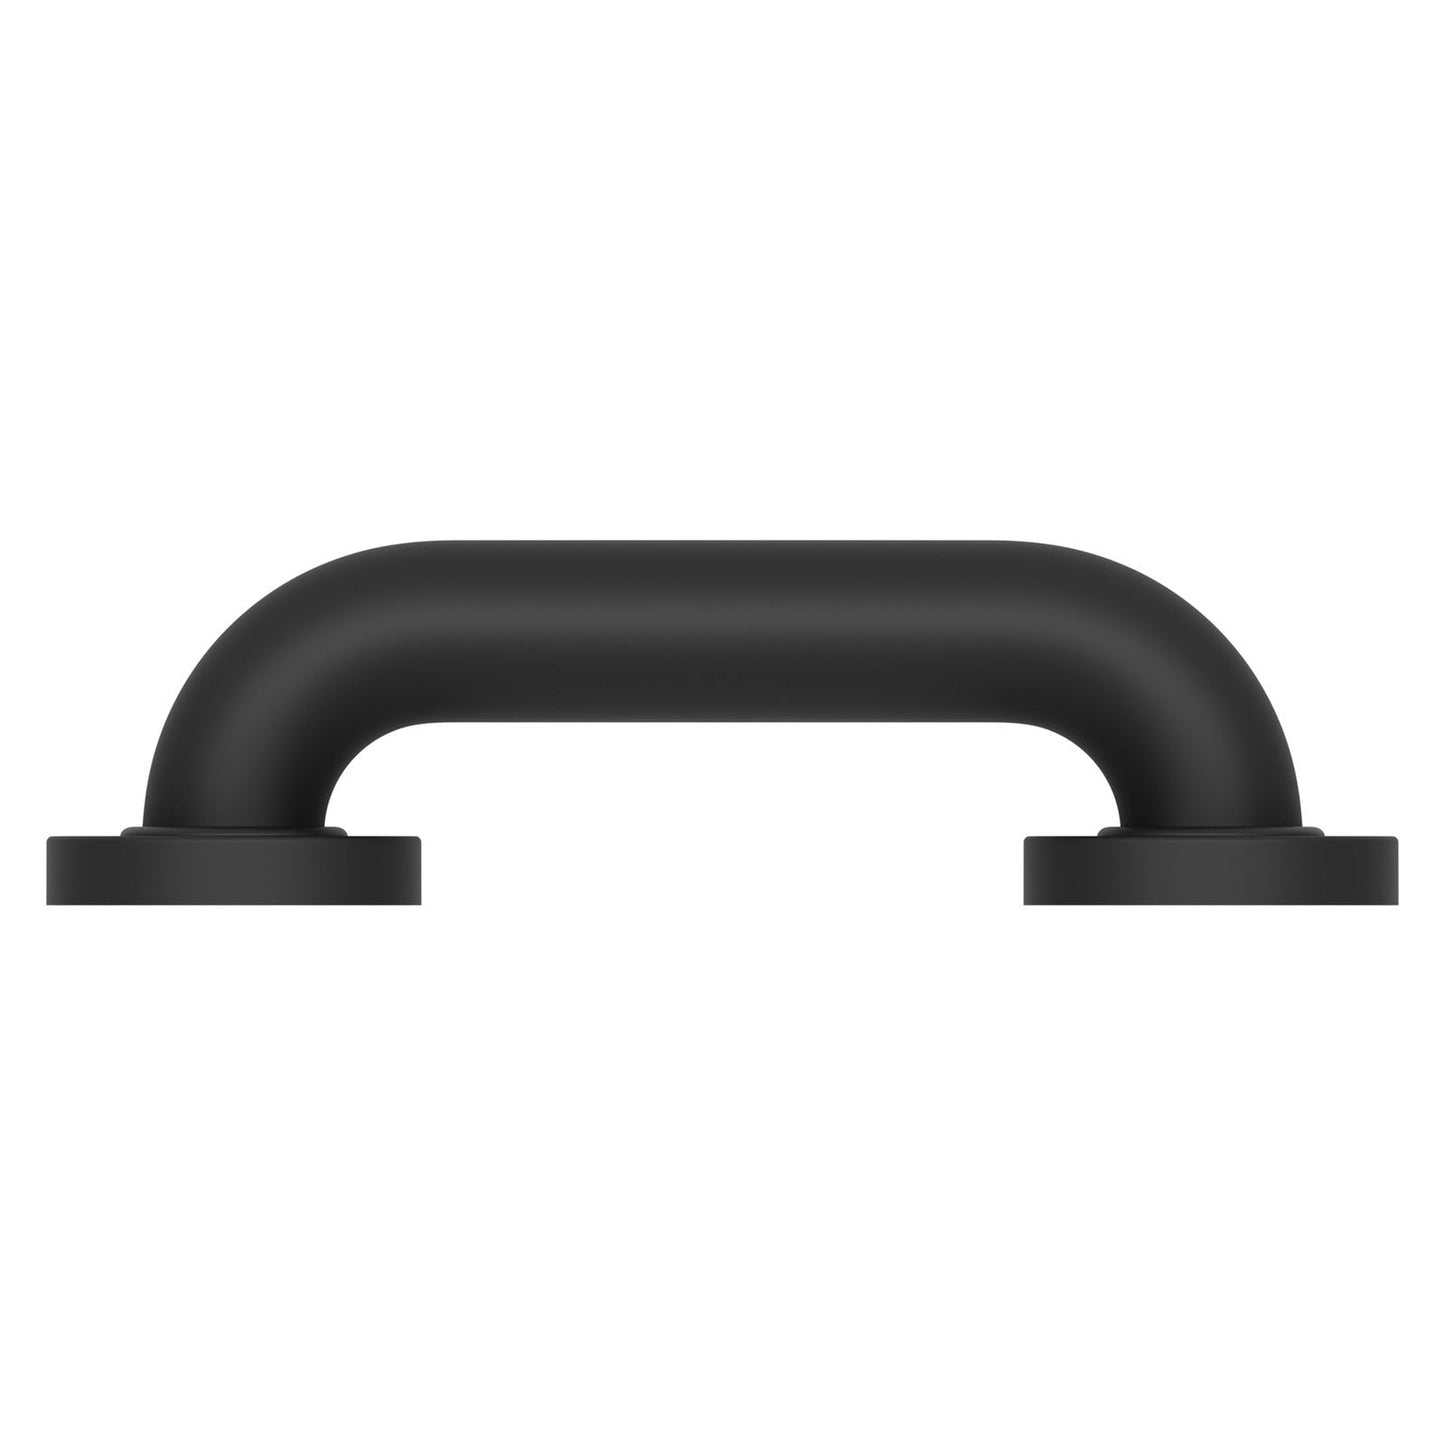 Evekare 8" x 1.5" Stainless Steel Concealed Mount Grab Bar in Matte Black